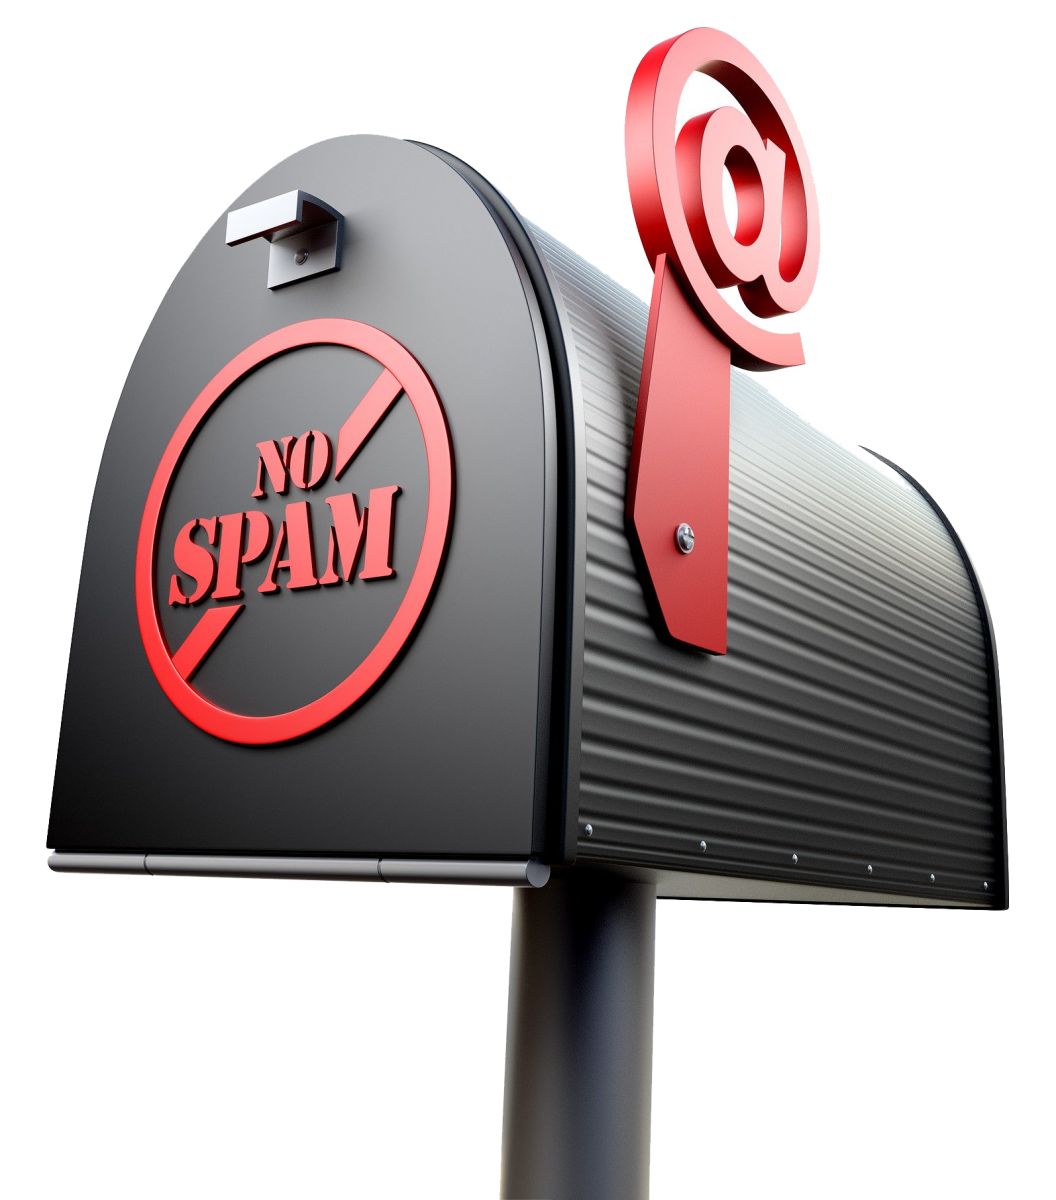 Blacklisted emails are also known as spam and typically find their way to your junk folder.